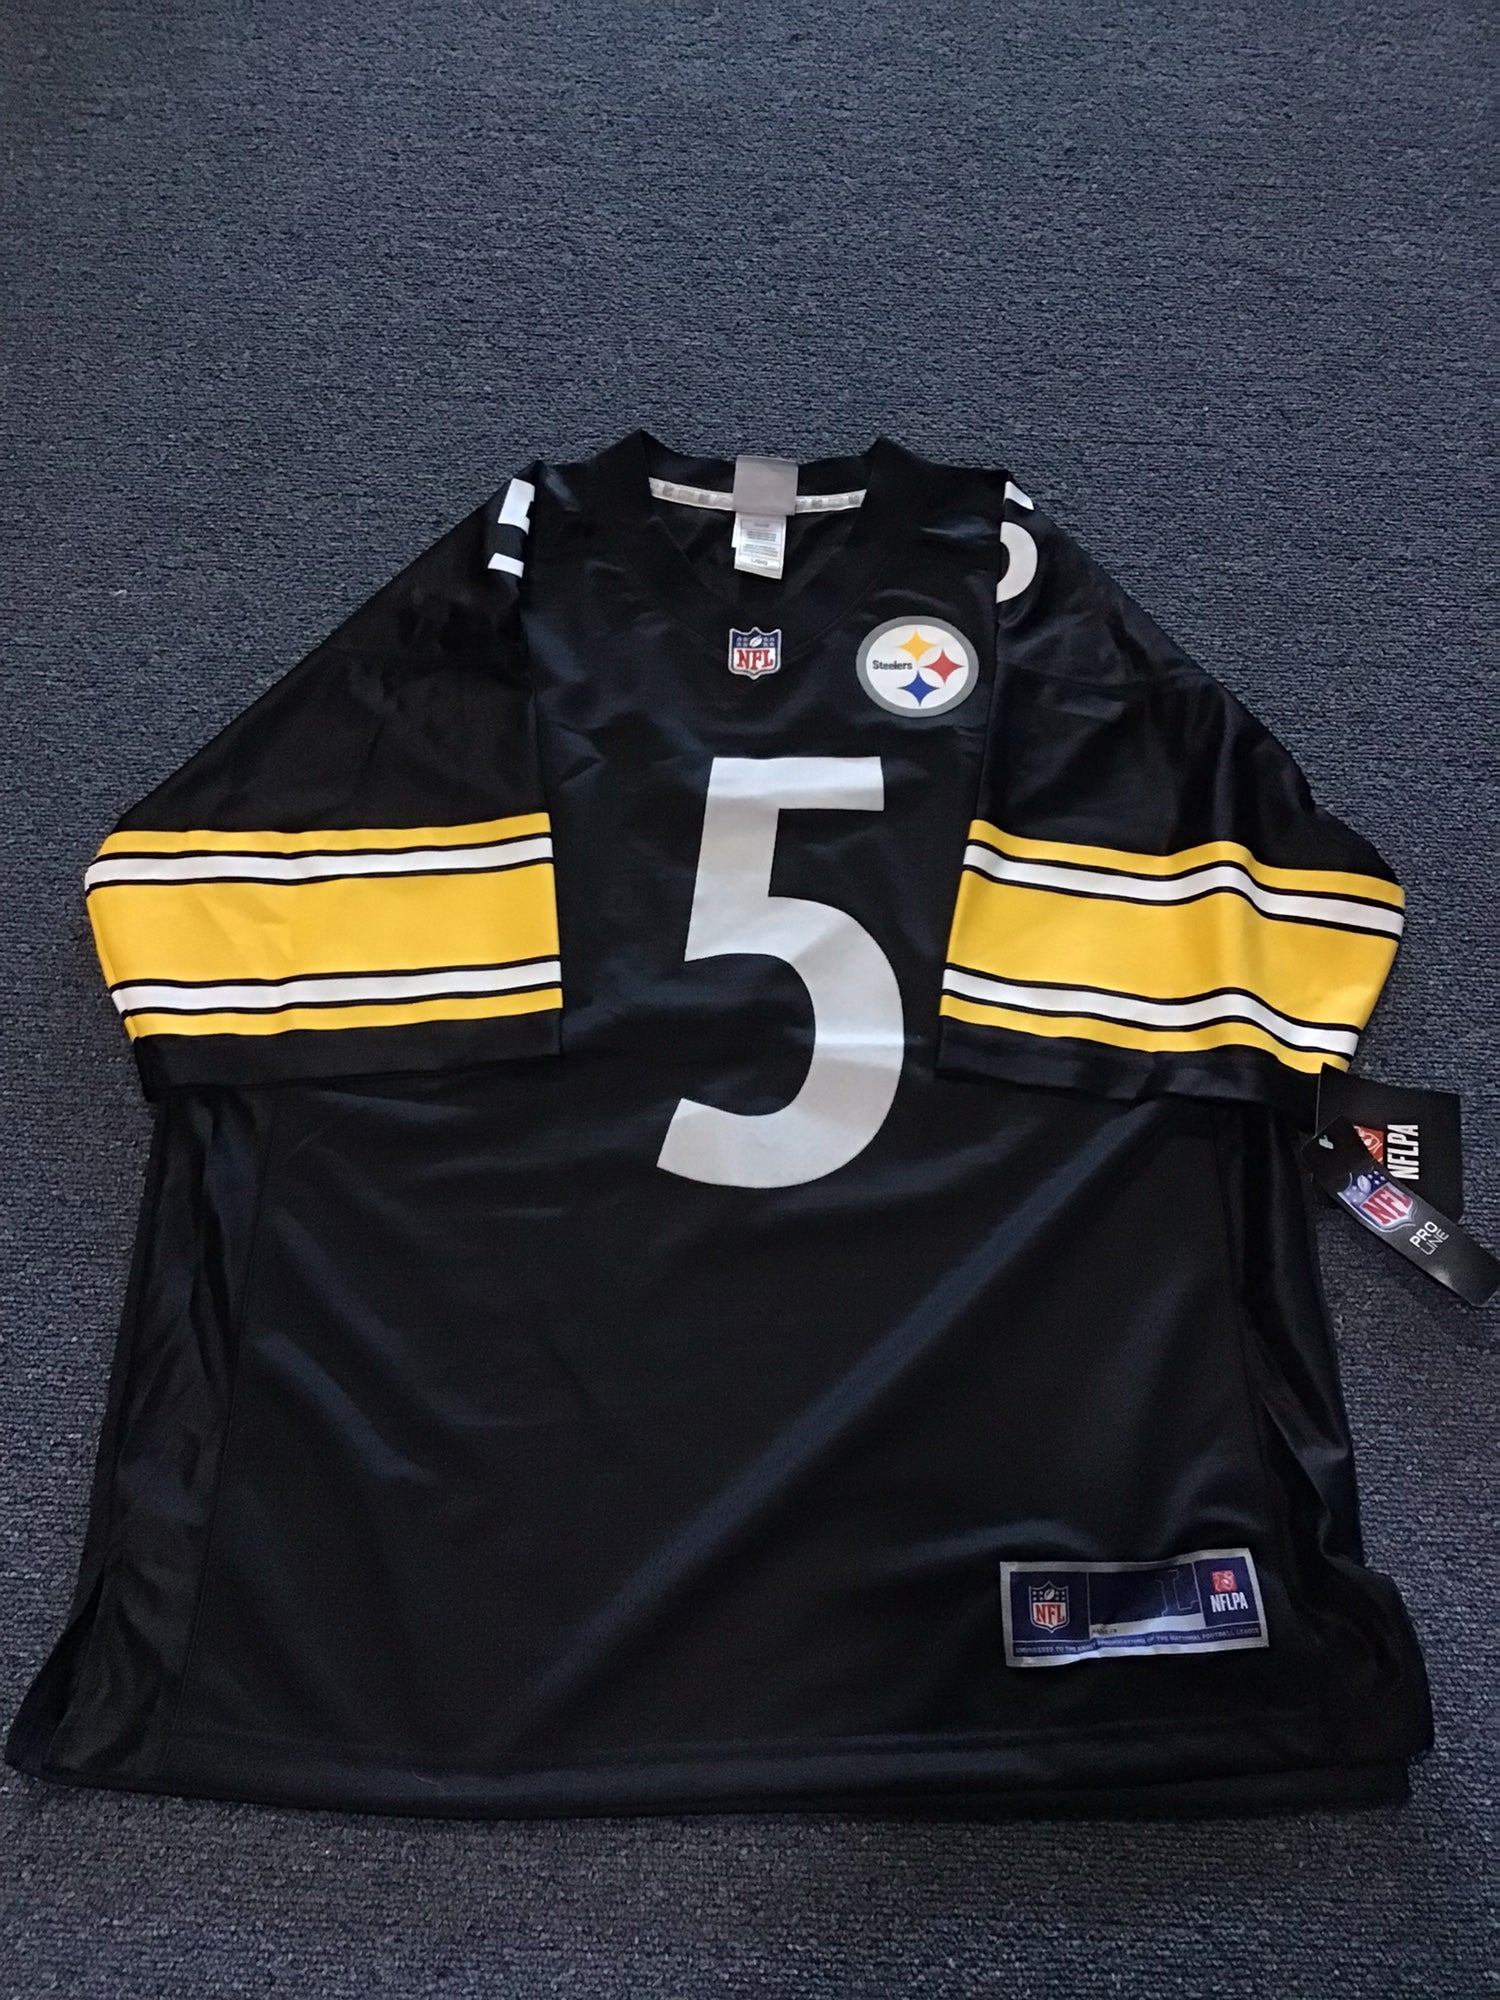 What are the best Pittsburgh Steelers jerseys to invest in, in